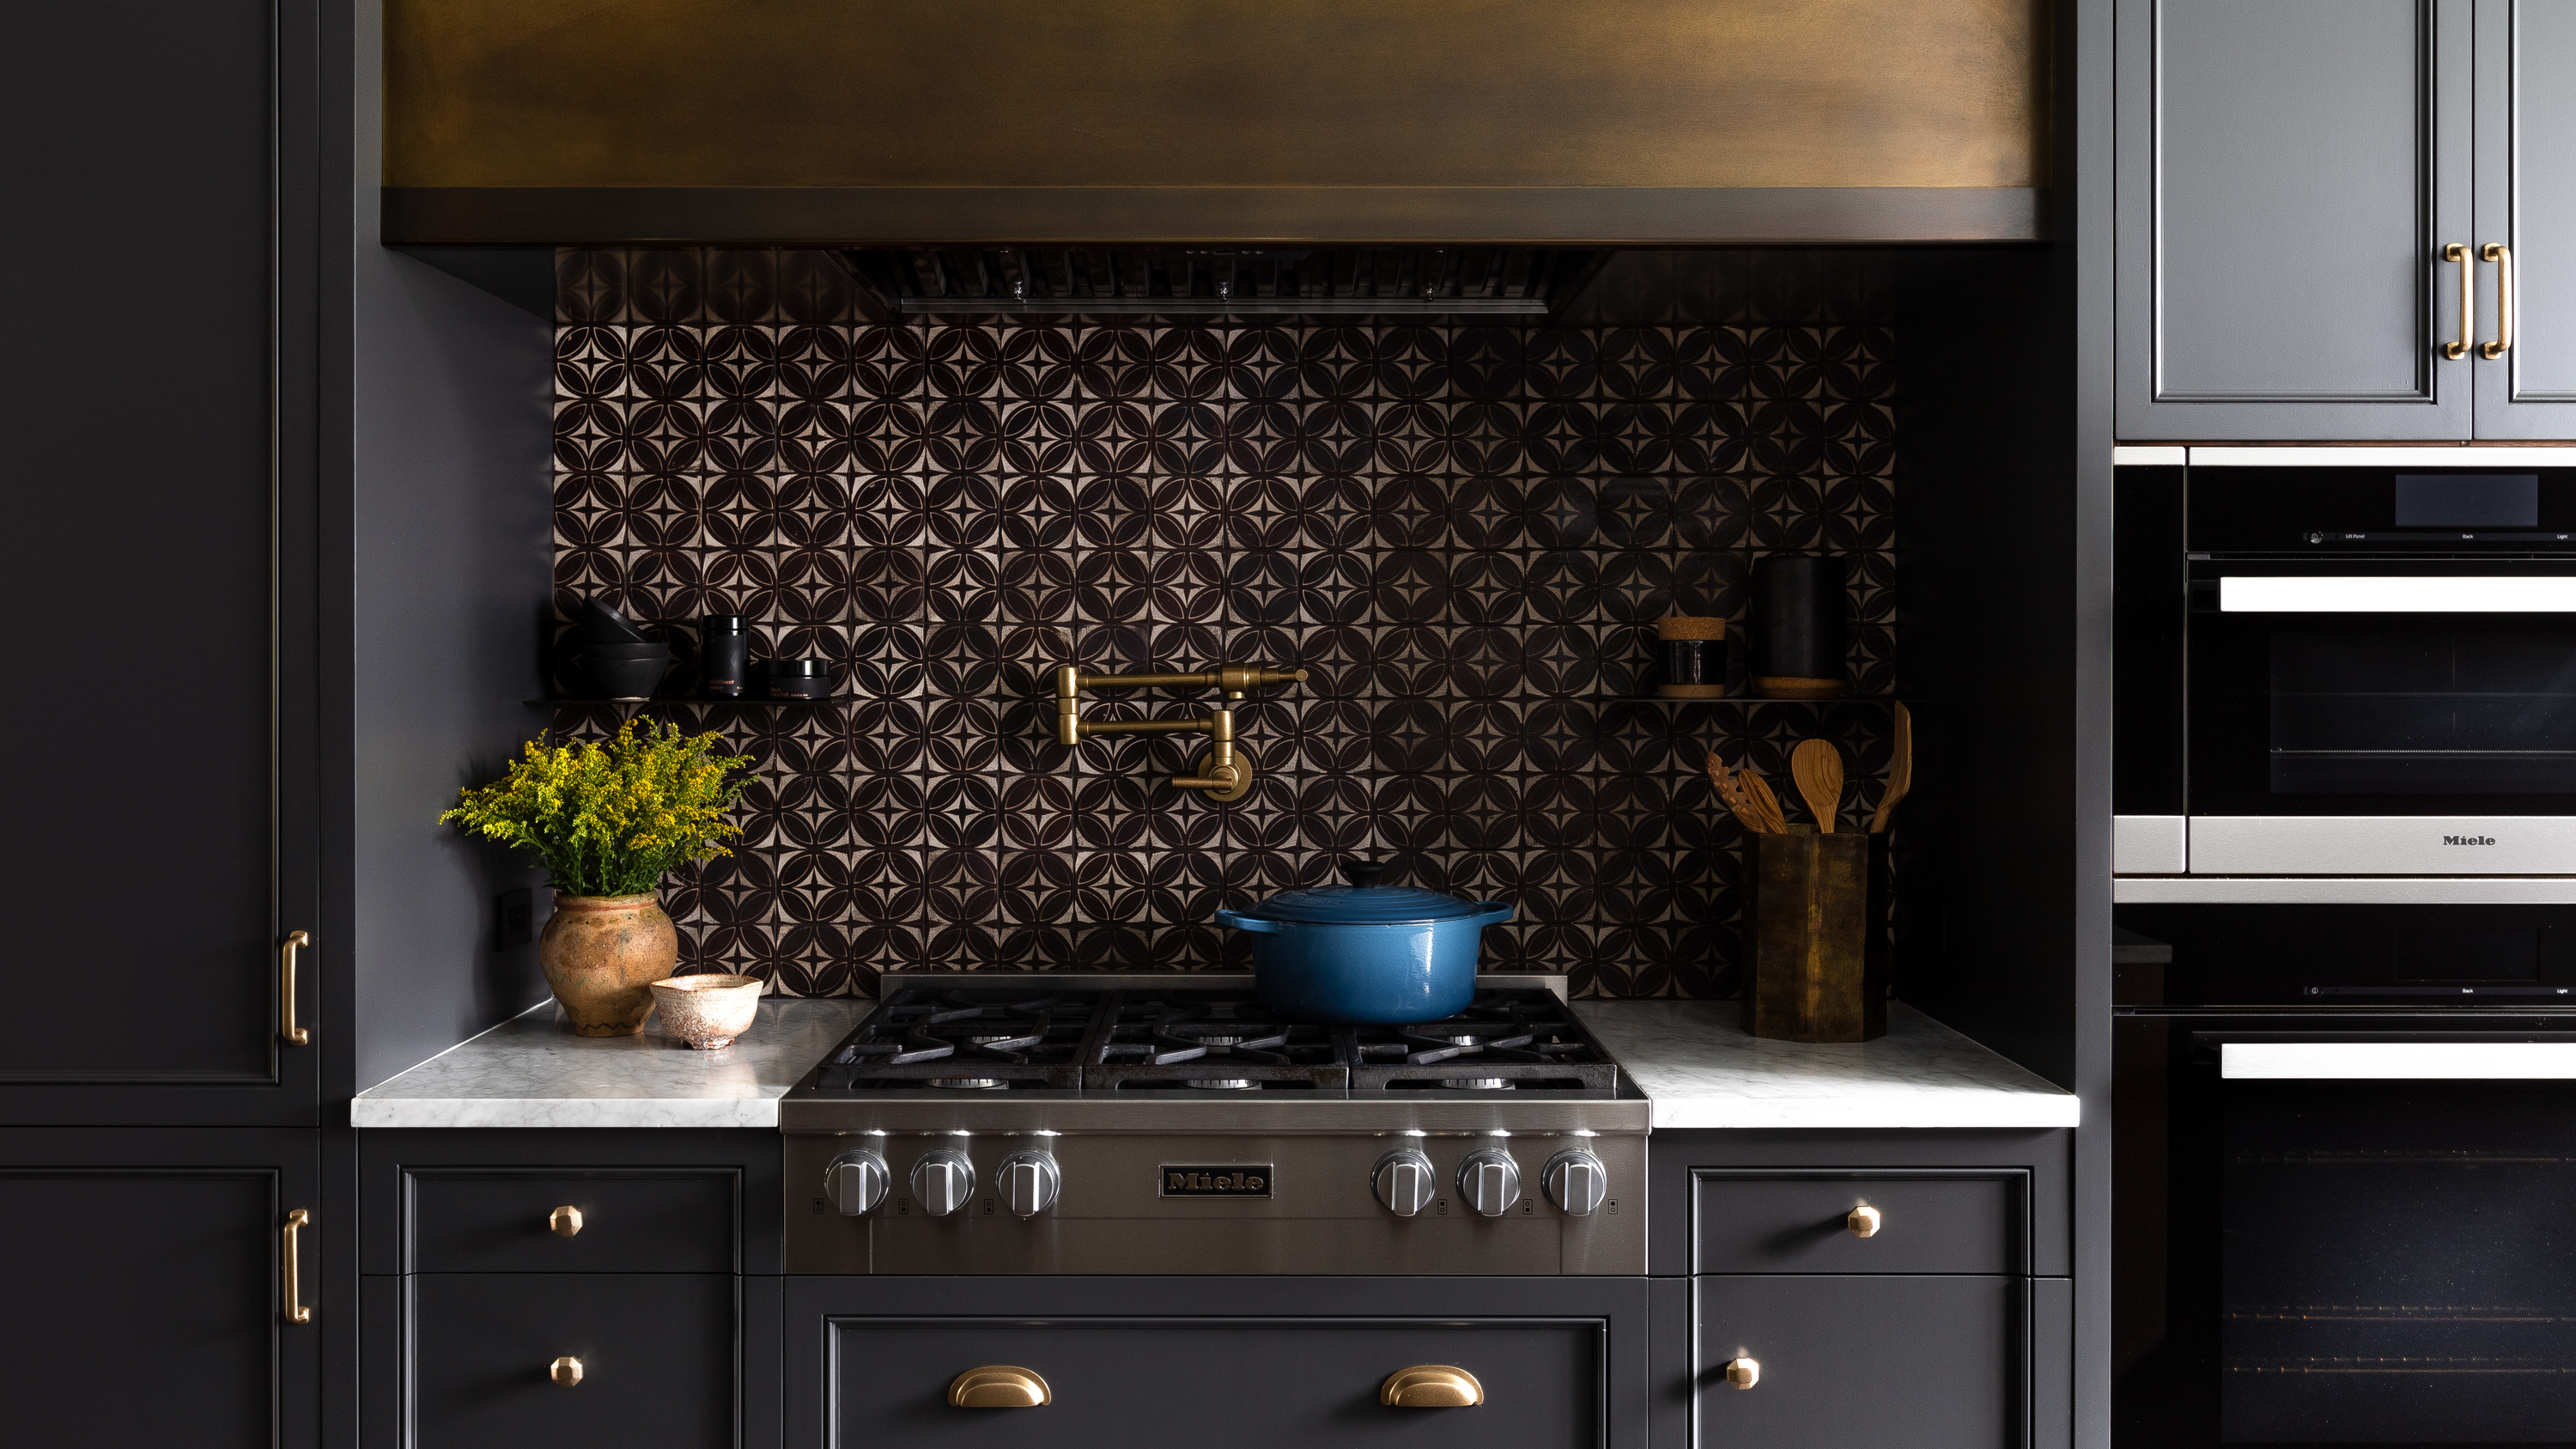 The range area showcases Miele appliances, graphic black and white tile, a custom aged brass hood, dark gray cabinets, and a clean white marble countertop, creating a handsome and masculine aesthetic